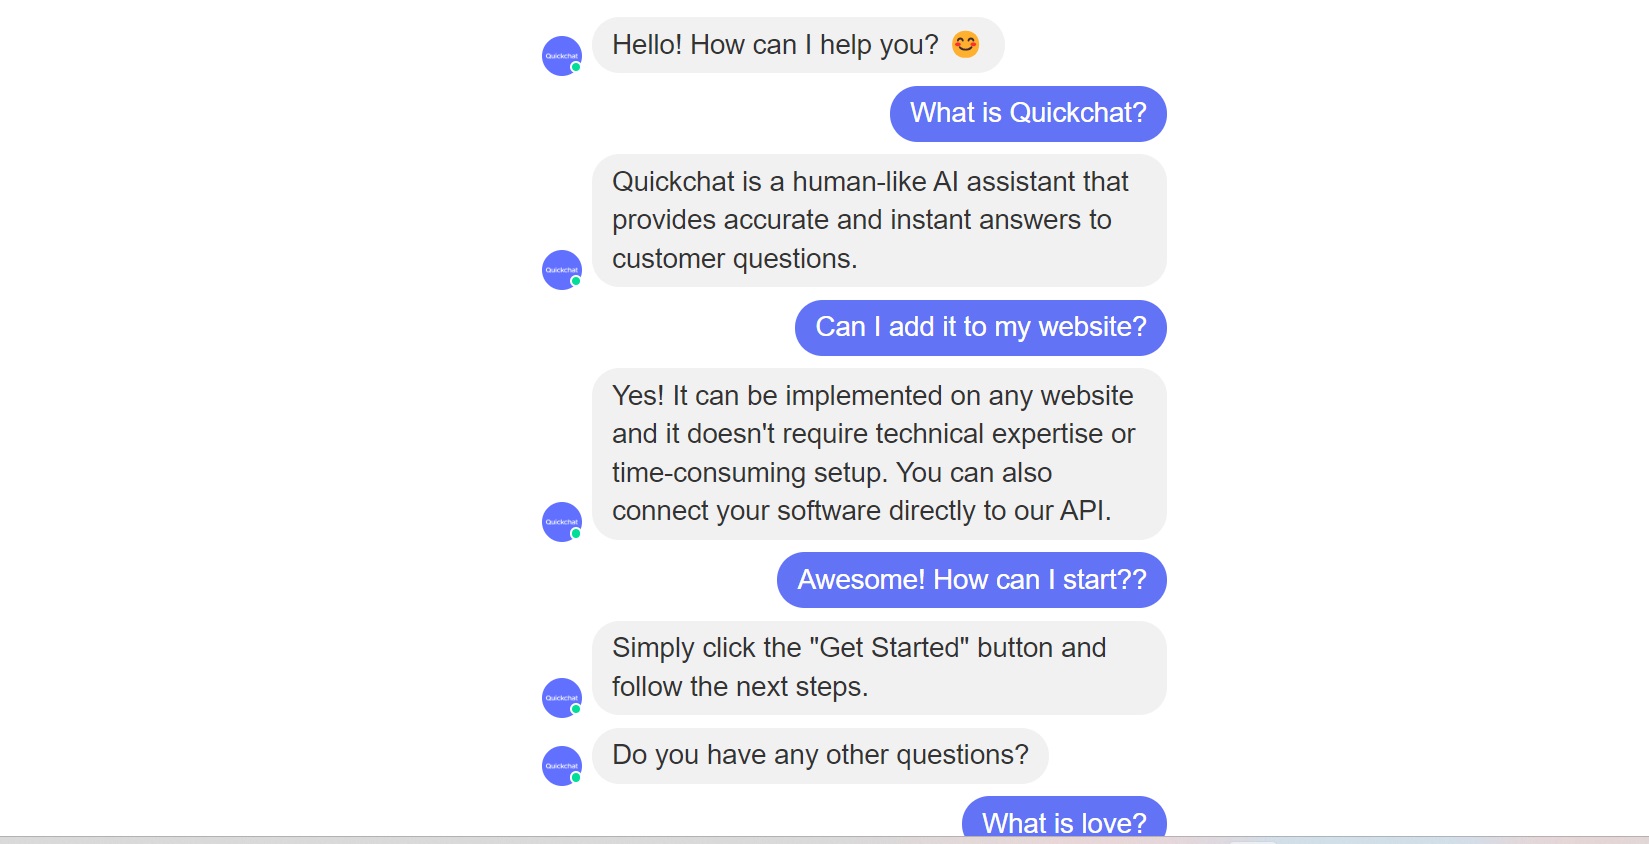 An example of Quickchat’s customer support messaging capabilities. This shows how Quickchat functions as a chatbot.